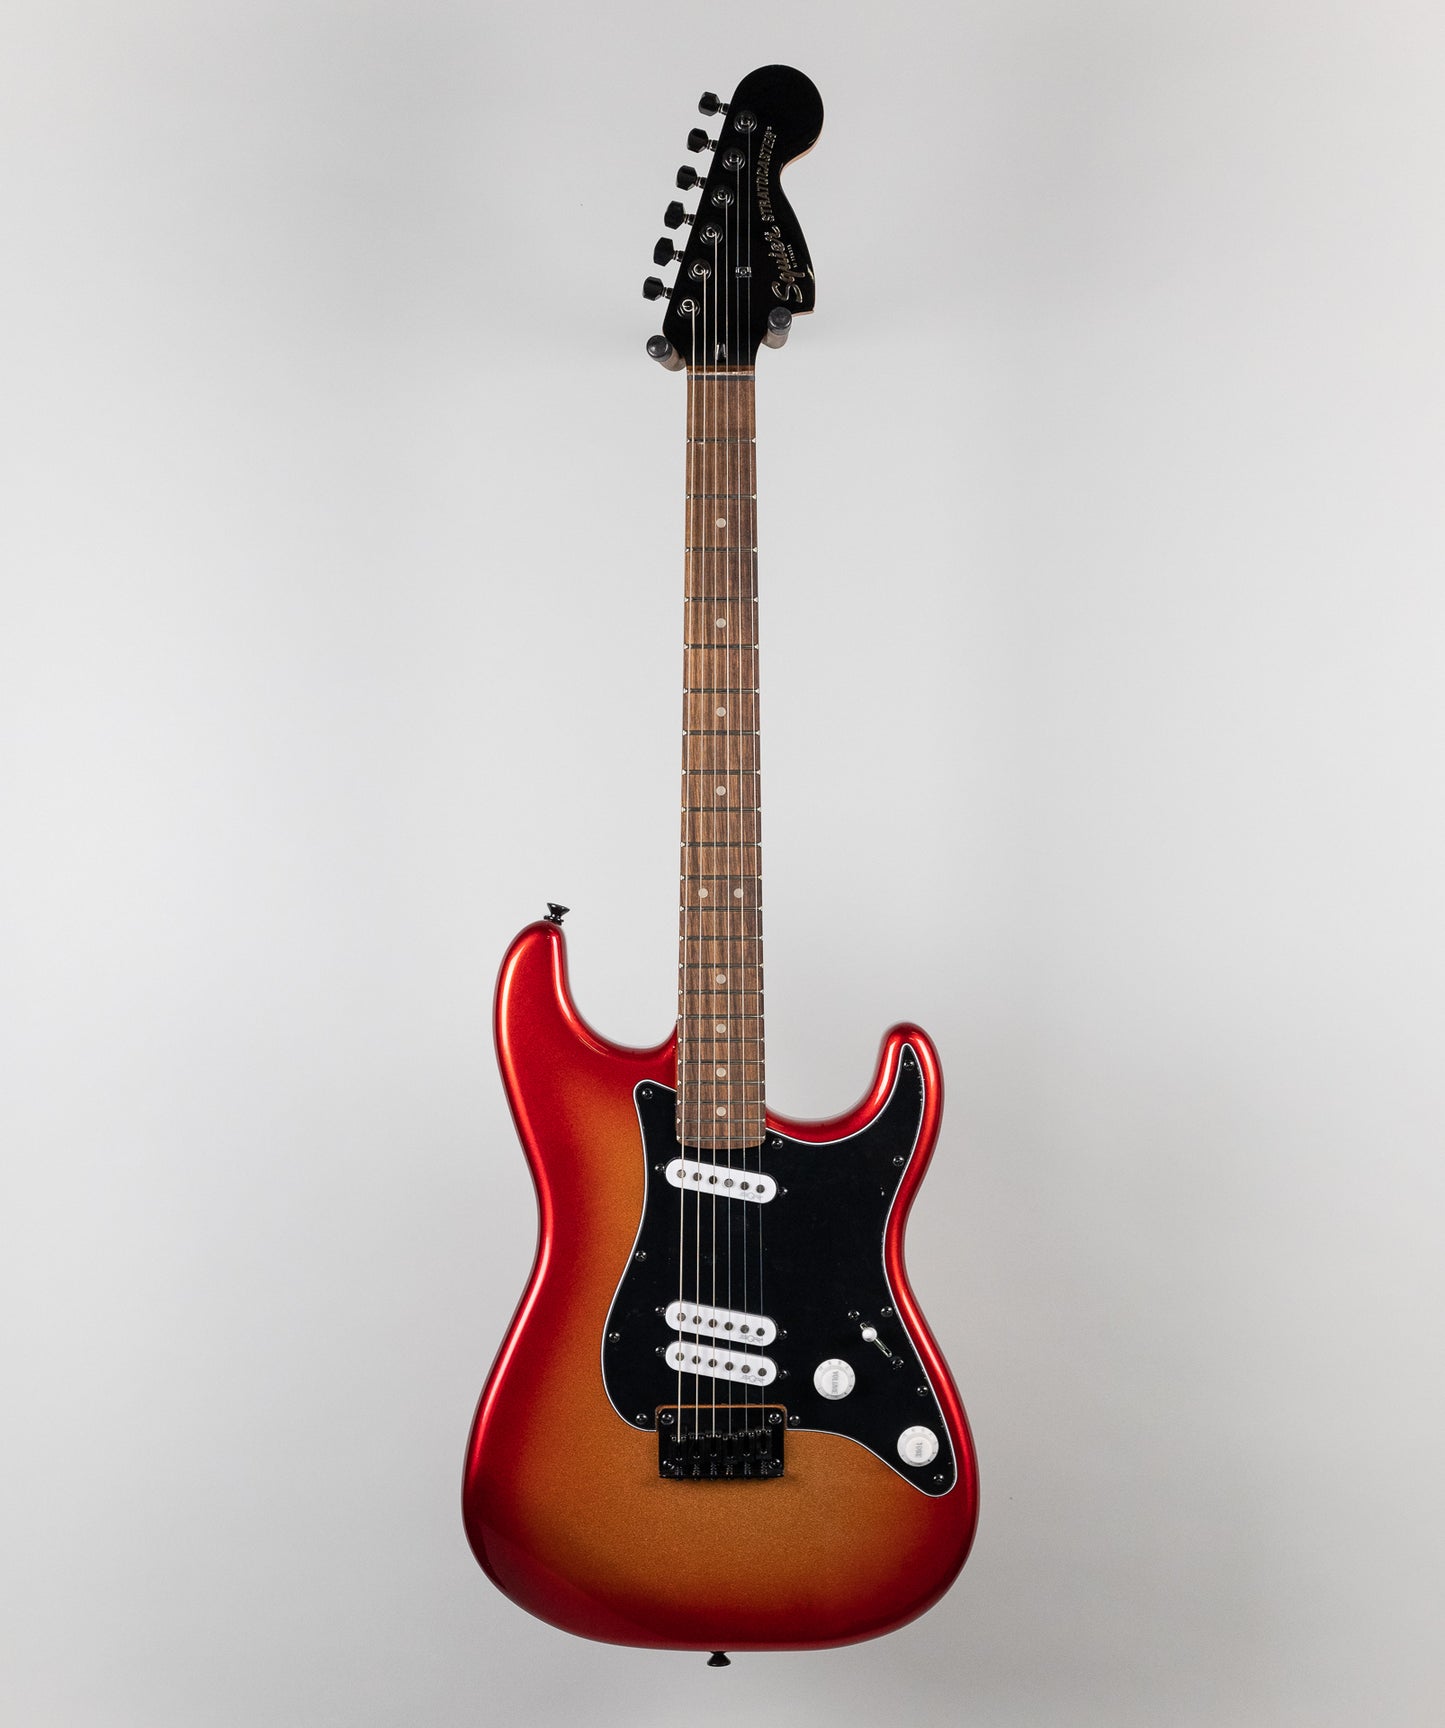 Squier Contemporary Stratocaster Special HT in Sunset Metallic